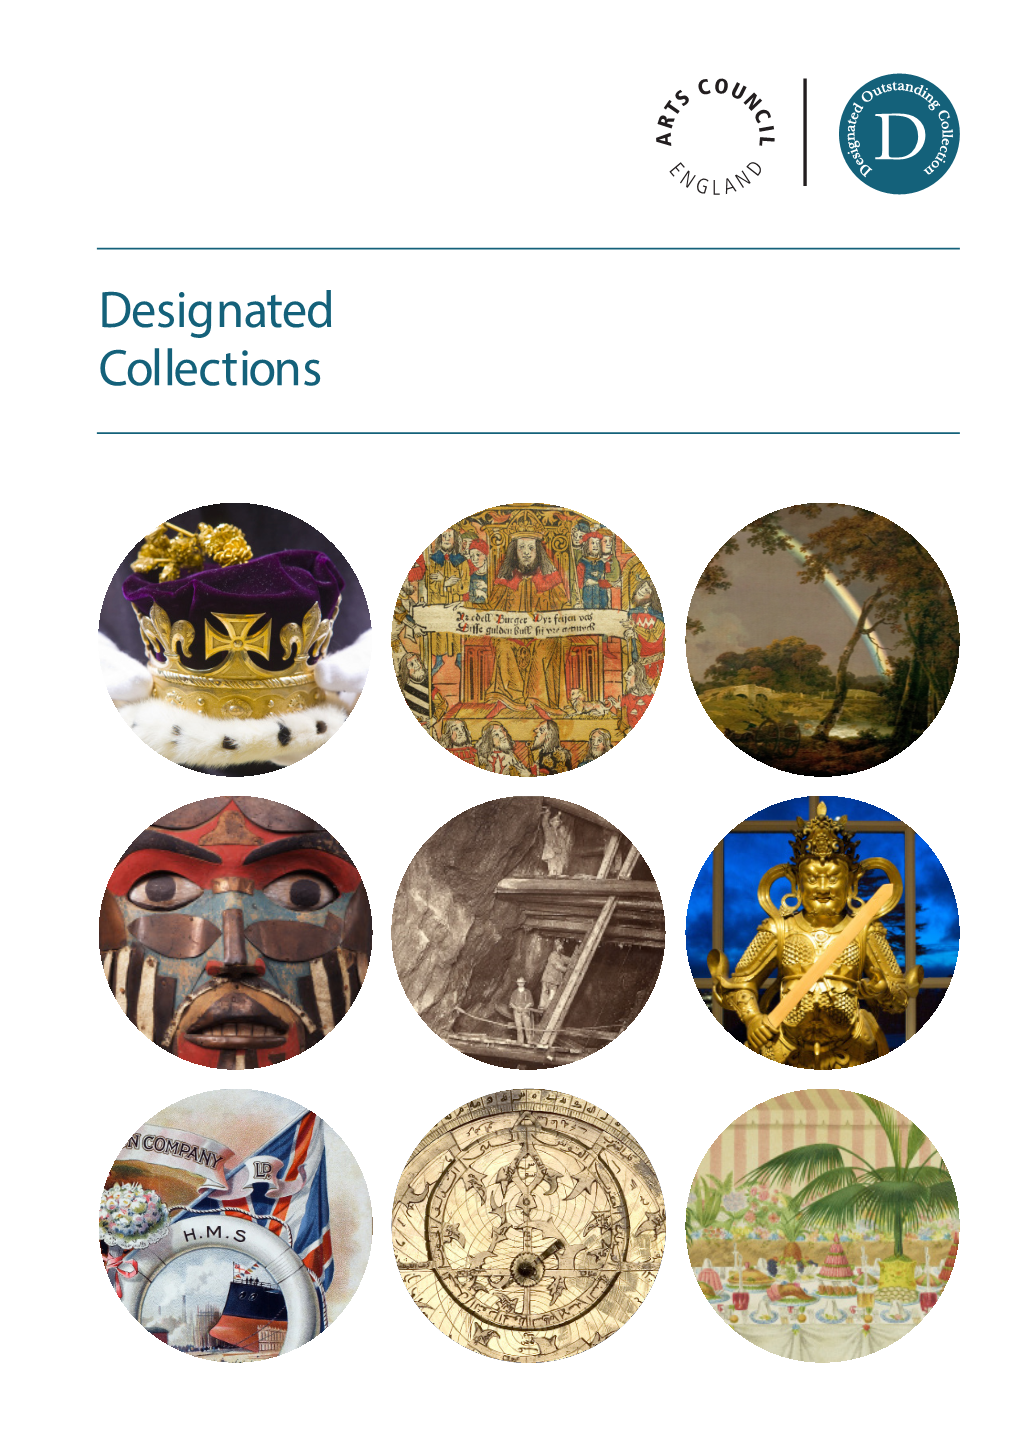 Designated Collections Contents